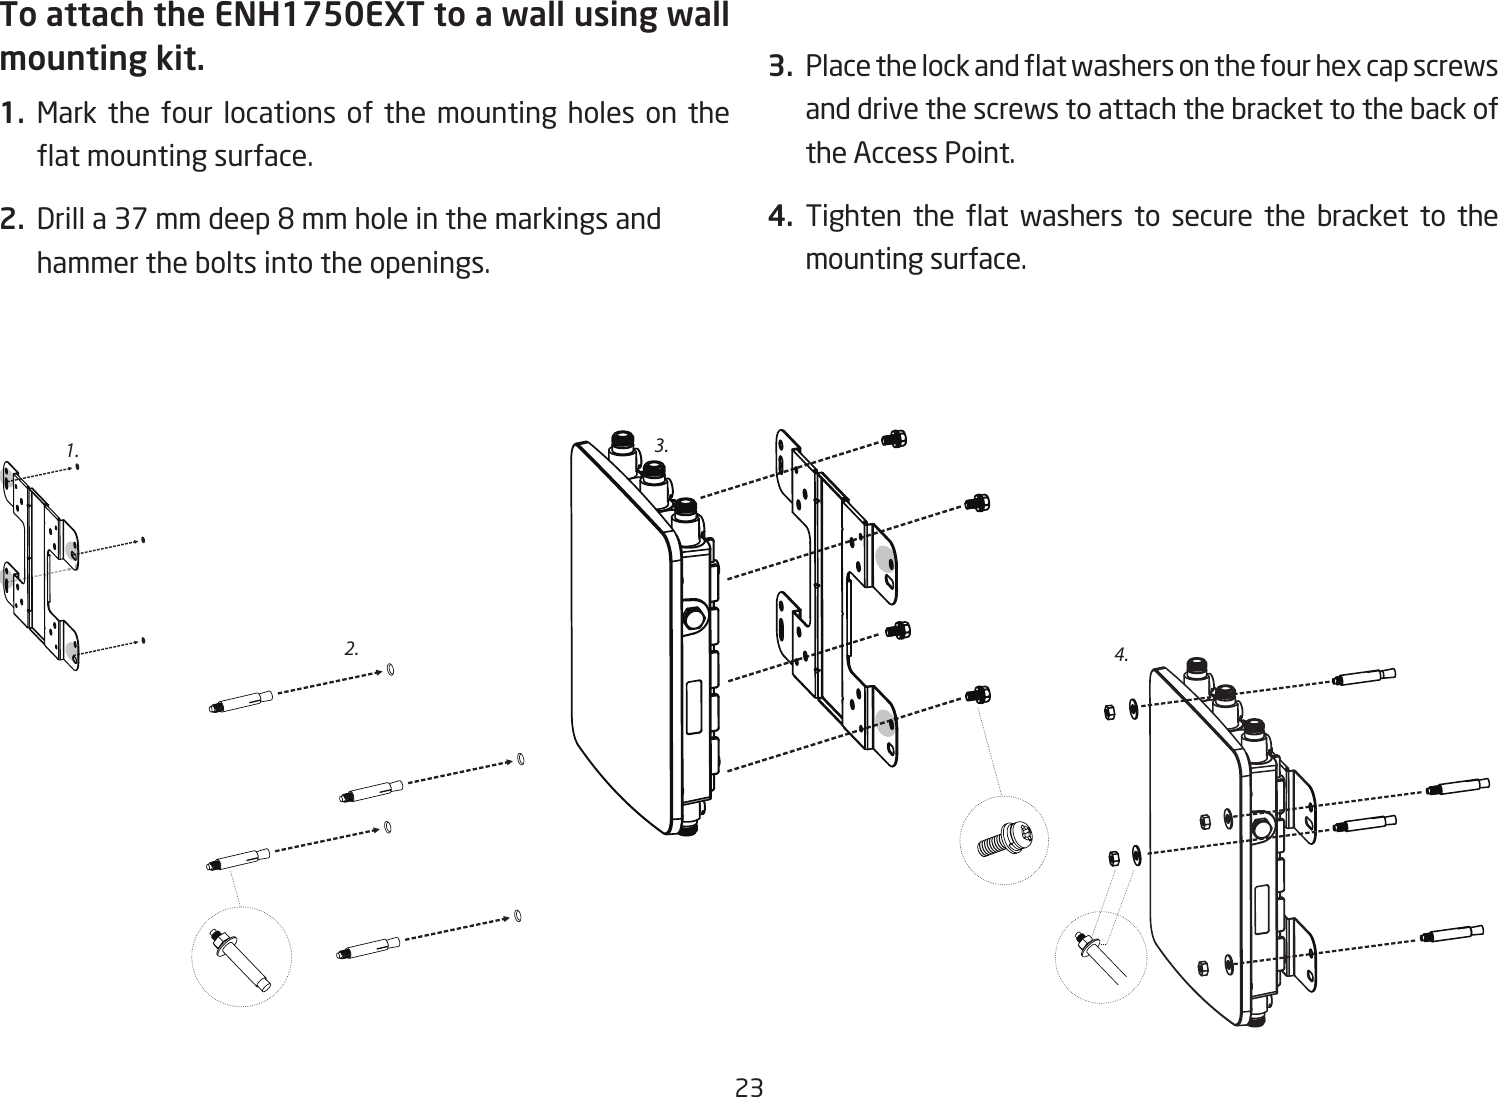 23To attach the ENH1750EXT to a wall using wall mounting kit.1.  Mark the four locations of the mounting holes on the at mounting surface.2.  Drill a 37 mm deep 8 mm hole in the markings and hammer the bolts into the openings.3.  Place the lock and at washers on the four hex cap screws and drive the screws to attach the bracket to the back of the Access Point.4.  Tighten  the  at  washers  to  secure  the  bracket  to  the mounting surface.2.3.4.1.